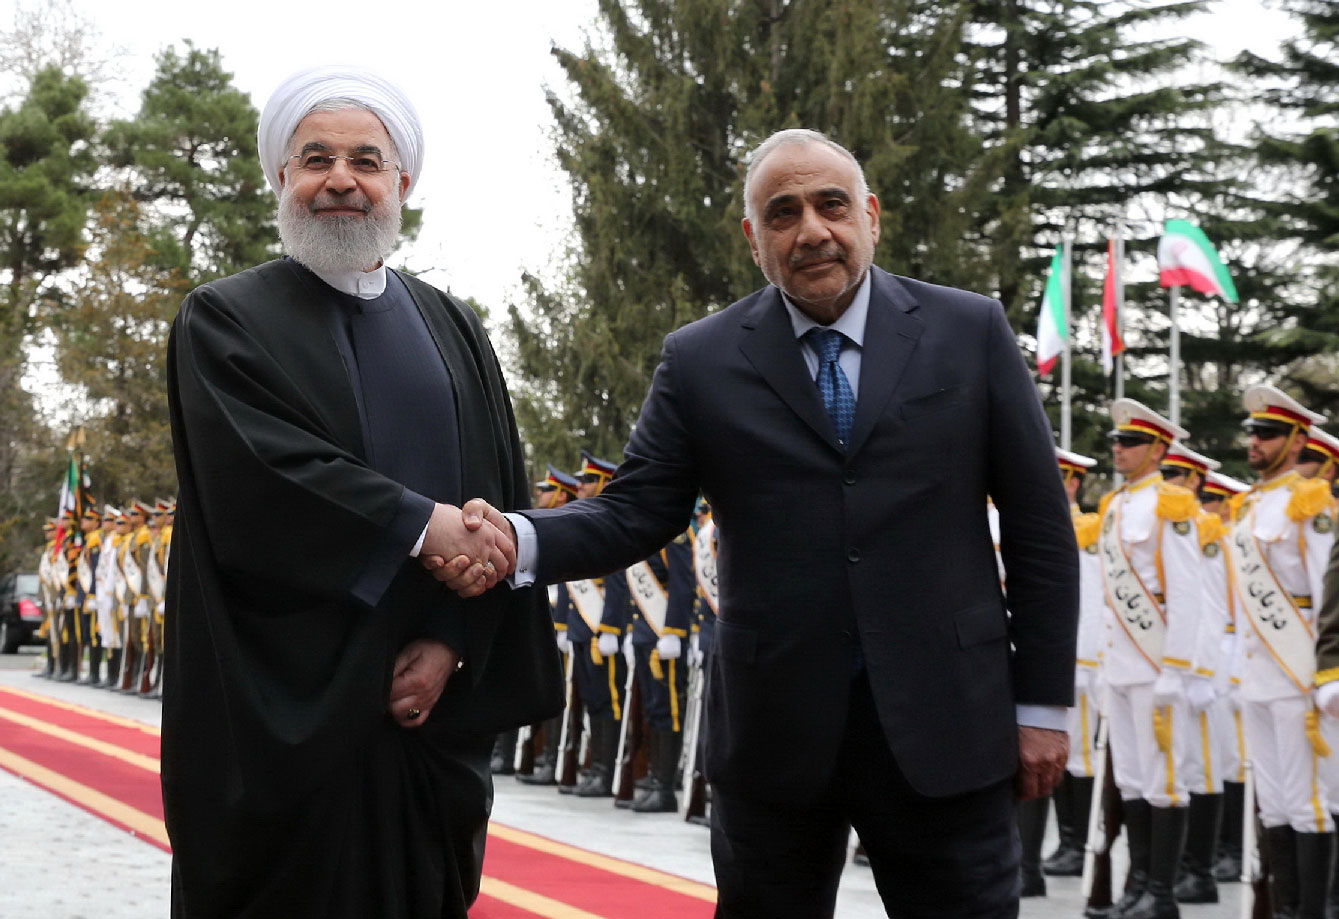 A handout picture provided by the Iranian presidency on April 6, 2019 shows Iranian President Hassan Rouhani (L) welcoming the Iraqi Prime Minister Adel Abdel Mahdi (R) in the Iranian capital Tehran.